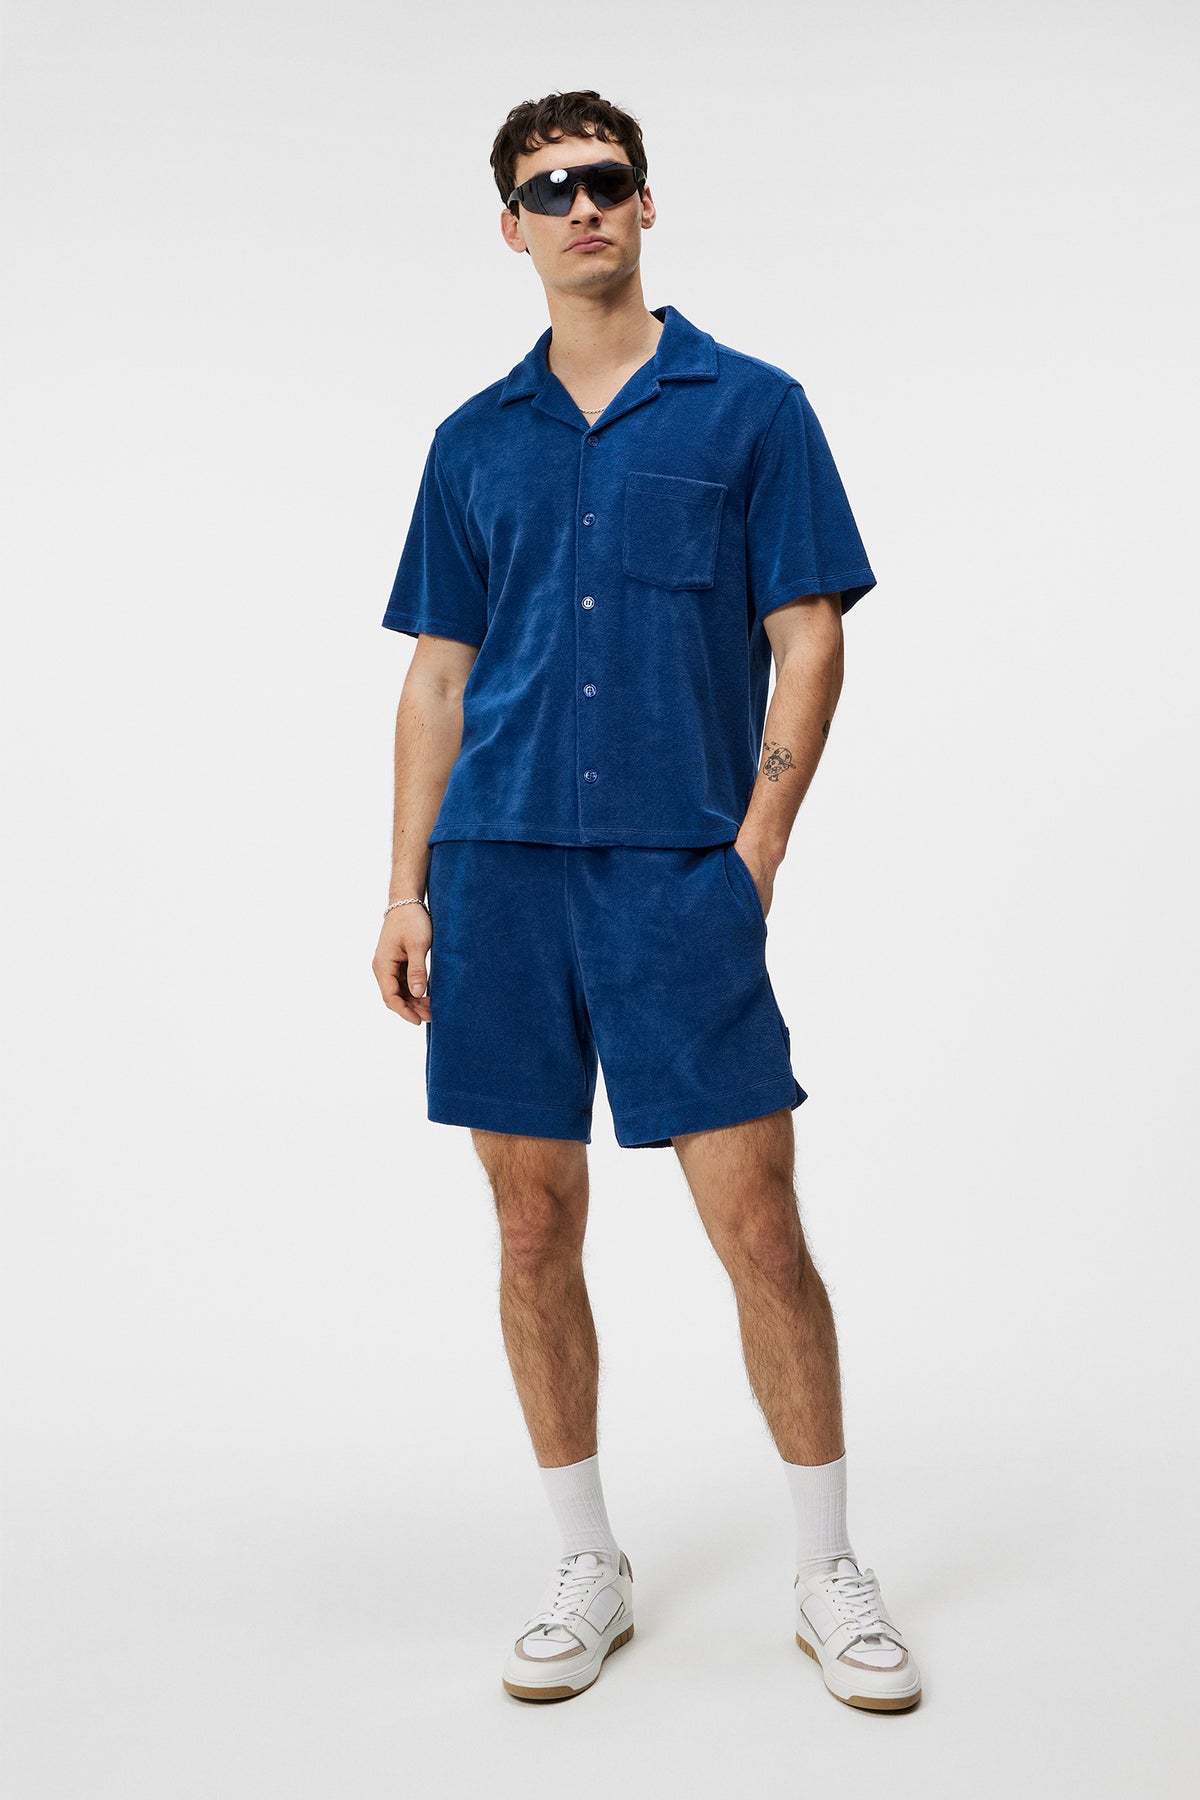 Ted Terry Resort Shirt / Estate Blue